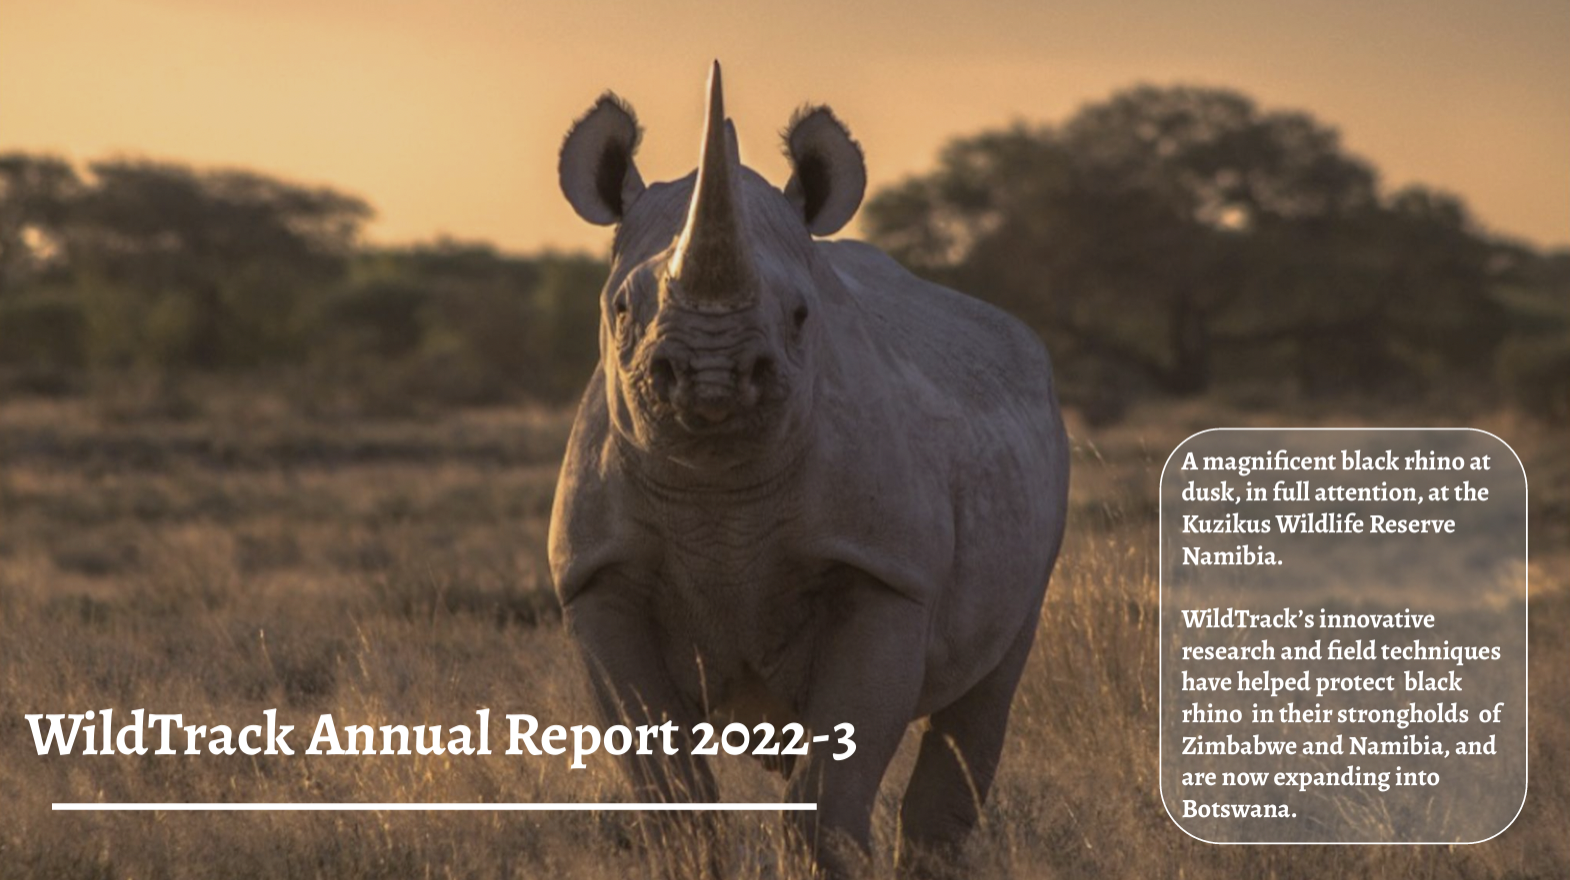 WildTrack Annual Report 2022-3 now out